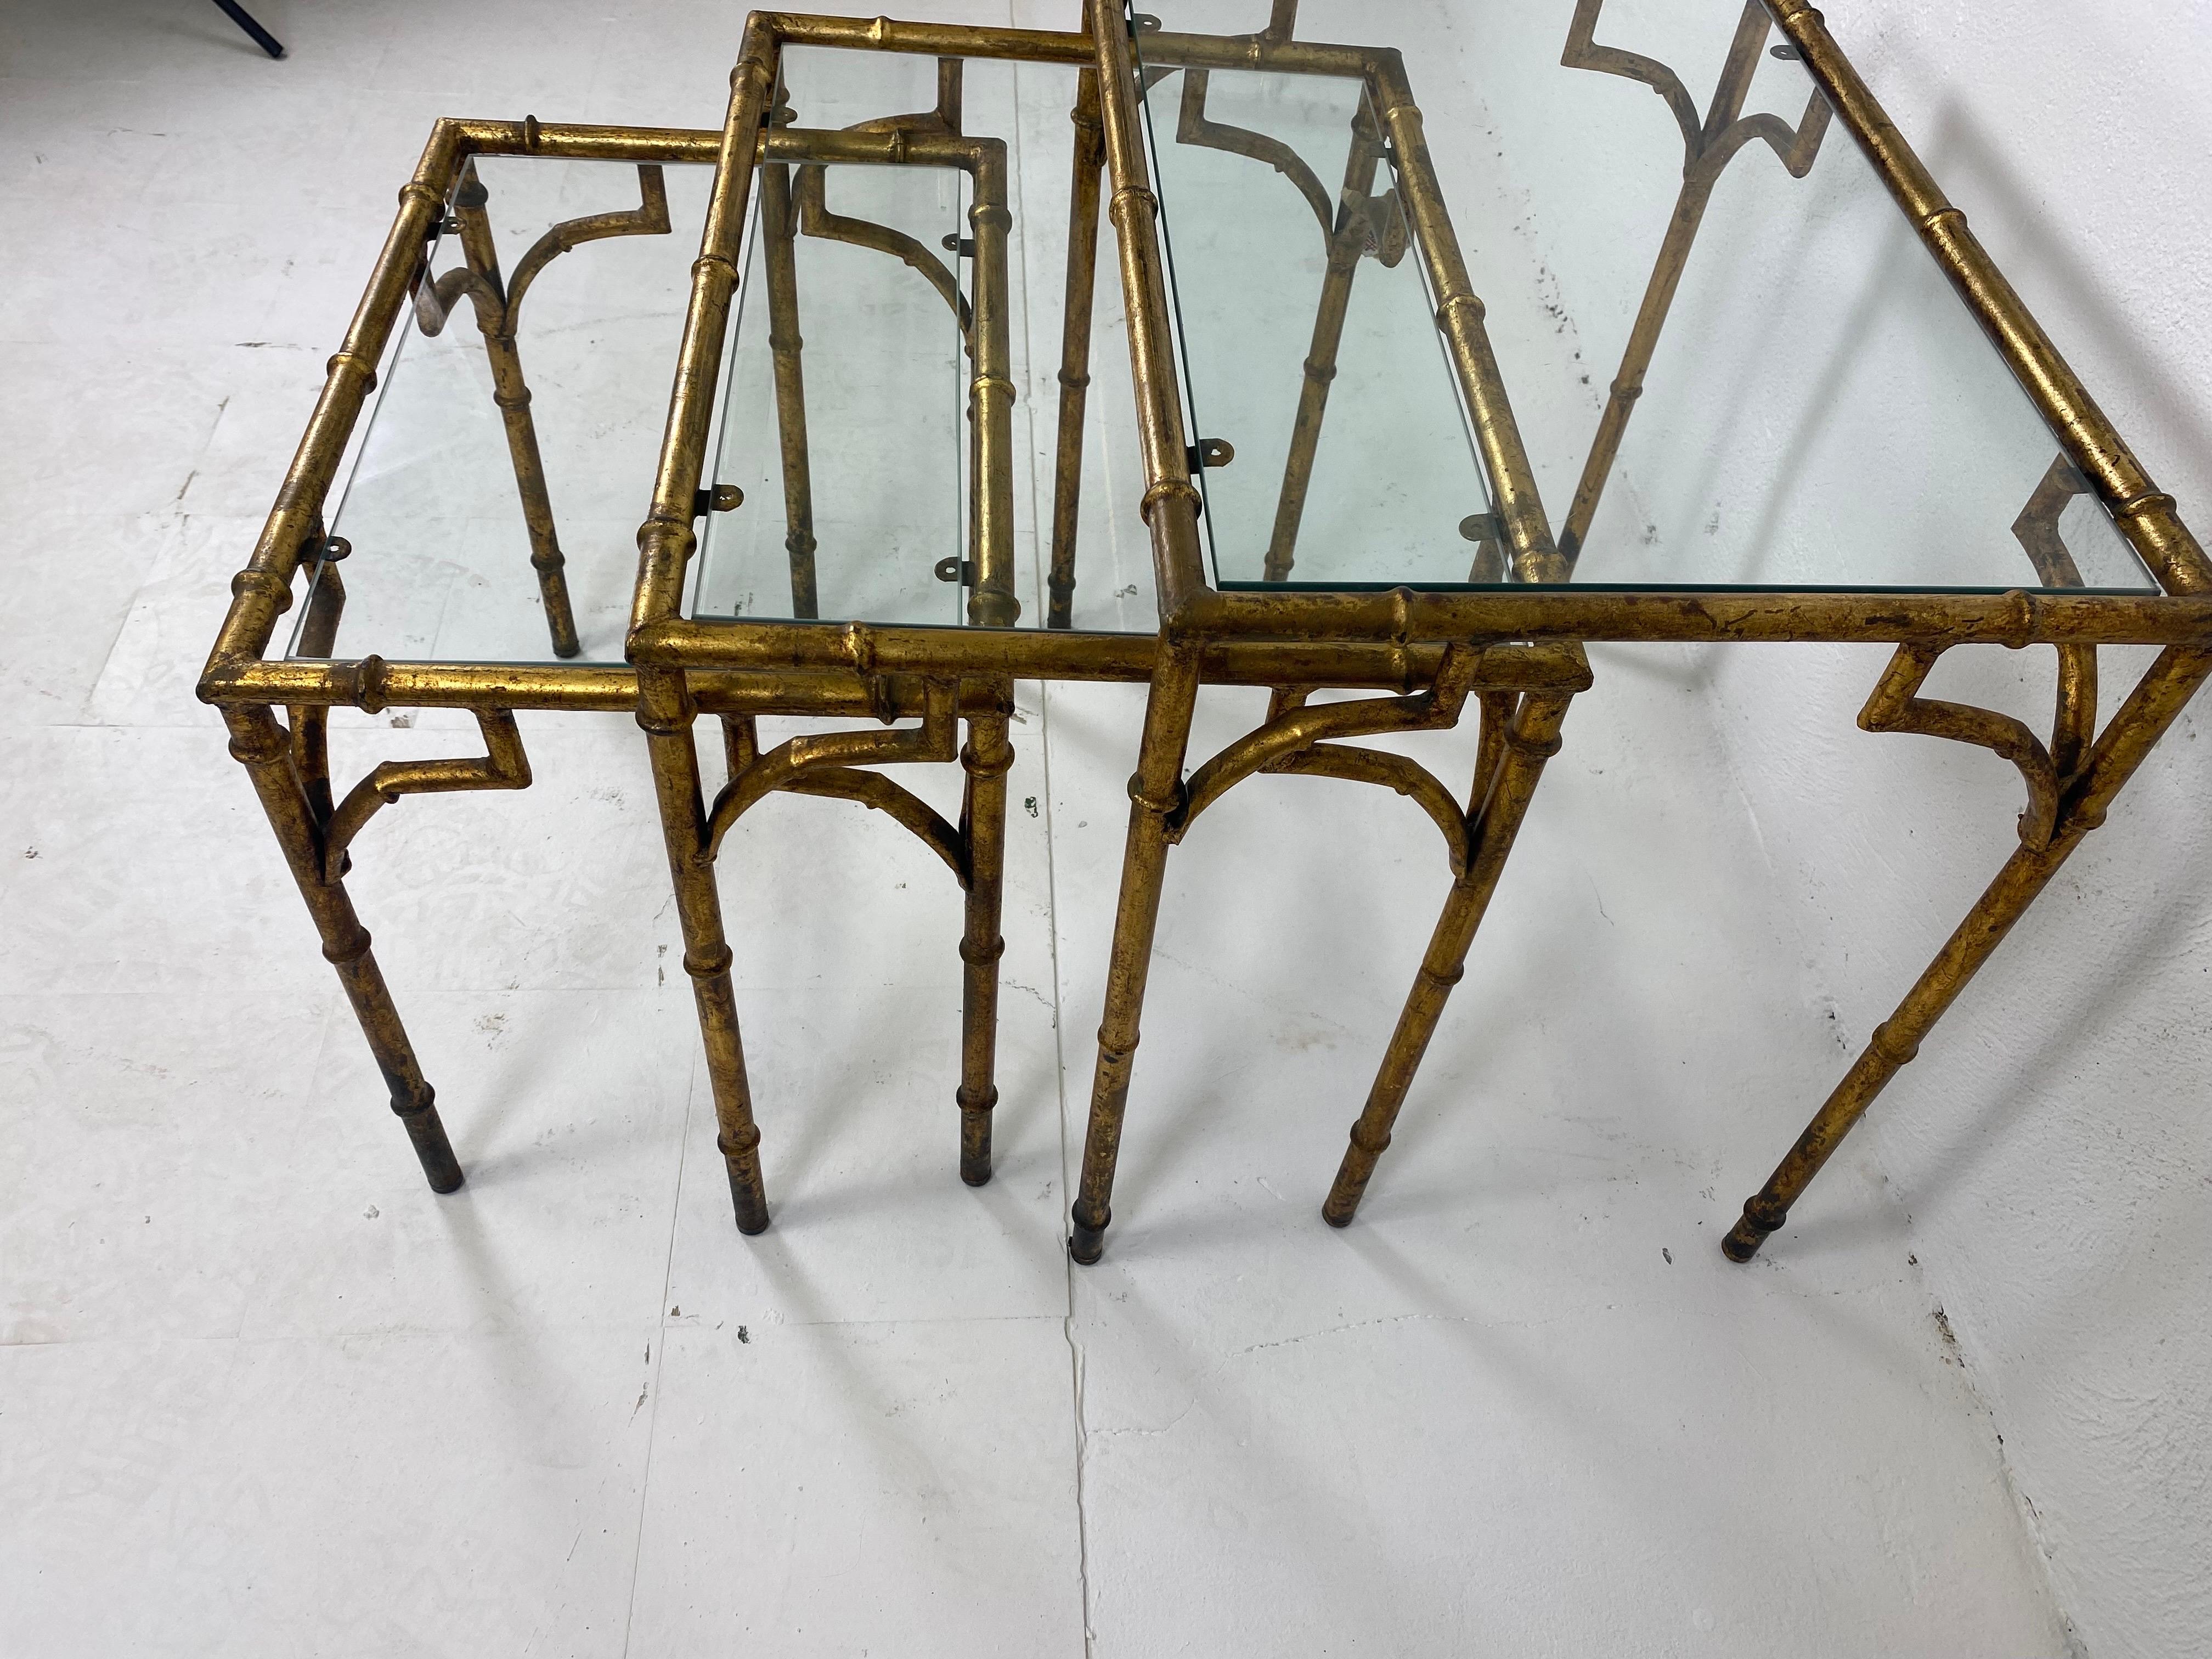 This is a vintage set of Italian gold gilded wrought iron faux bamboo nest of tables. Each table has a glass top and the tables snuggly fit together underneath the larger table. The gold leafing has a distressed finish to the surface. These tables